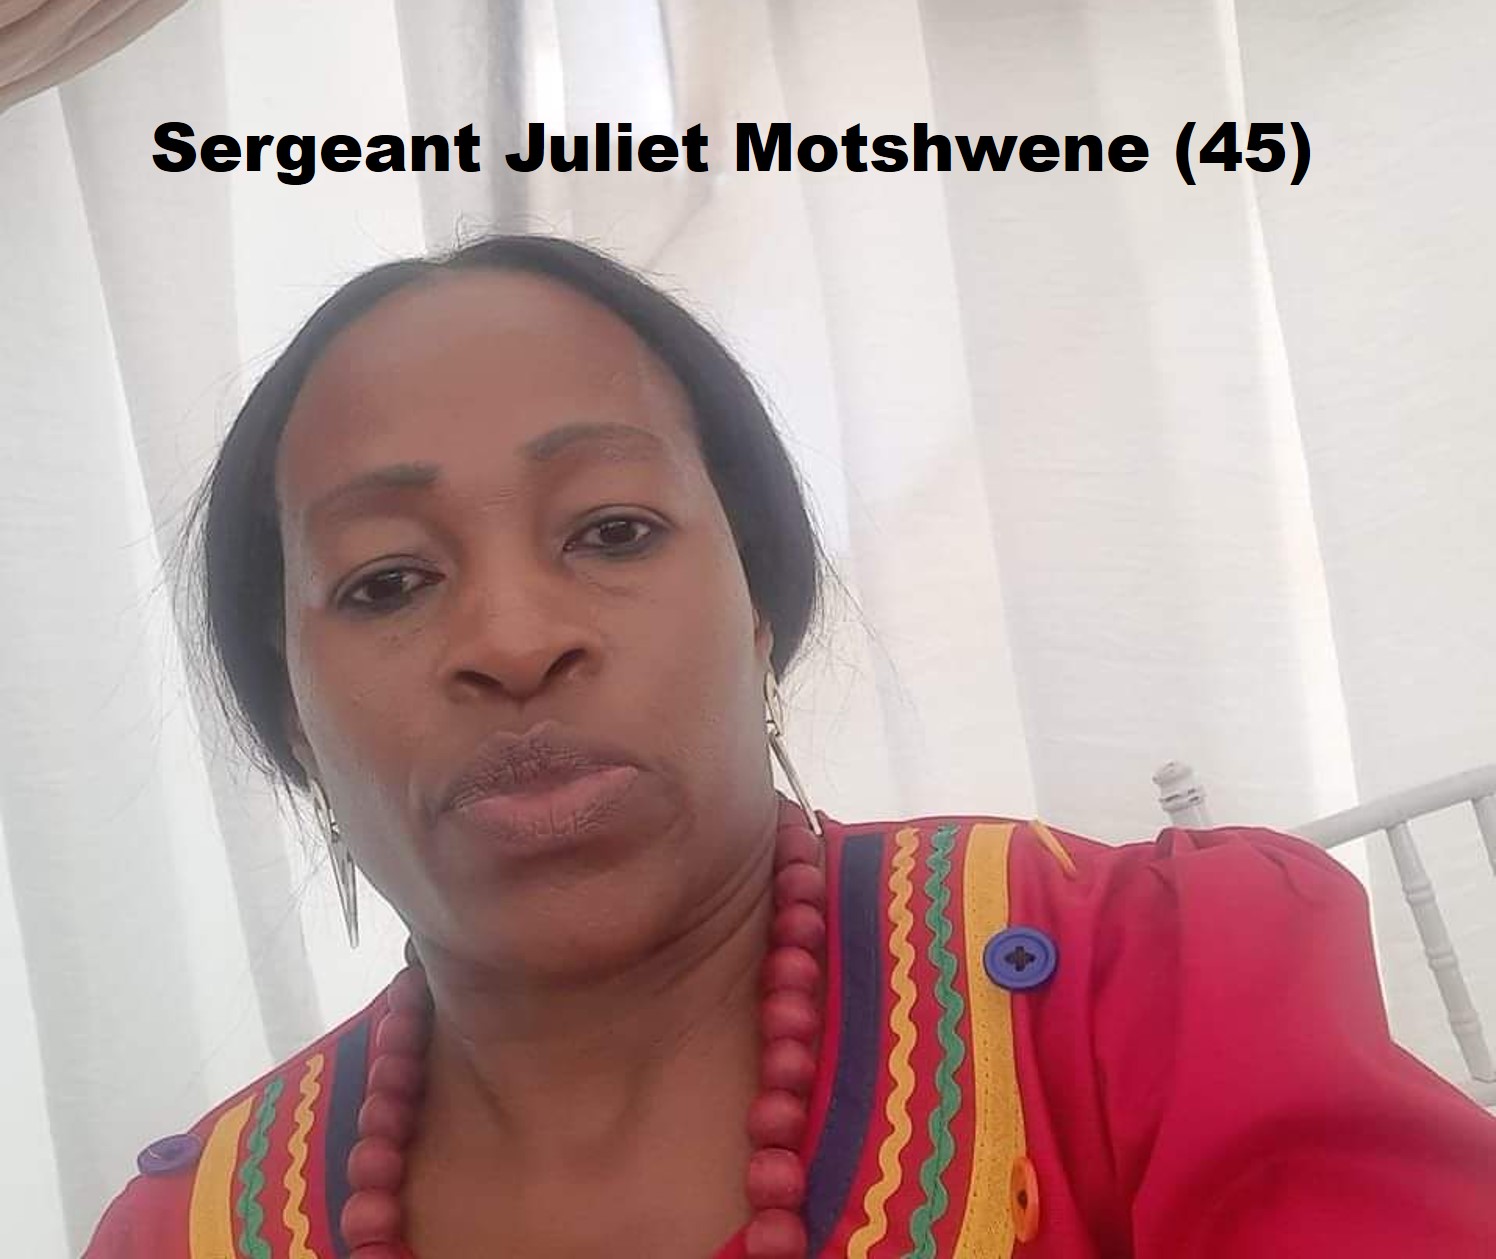 Acting Provincial Commissioner launches immediate investigation into the disappearance of Sergeant Juliet Motshwene